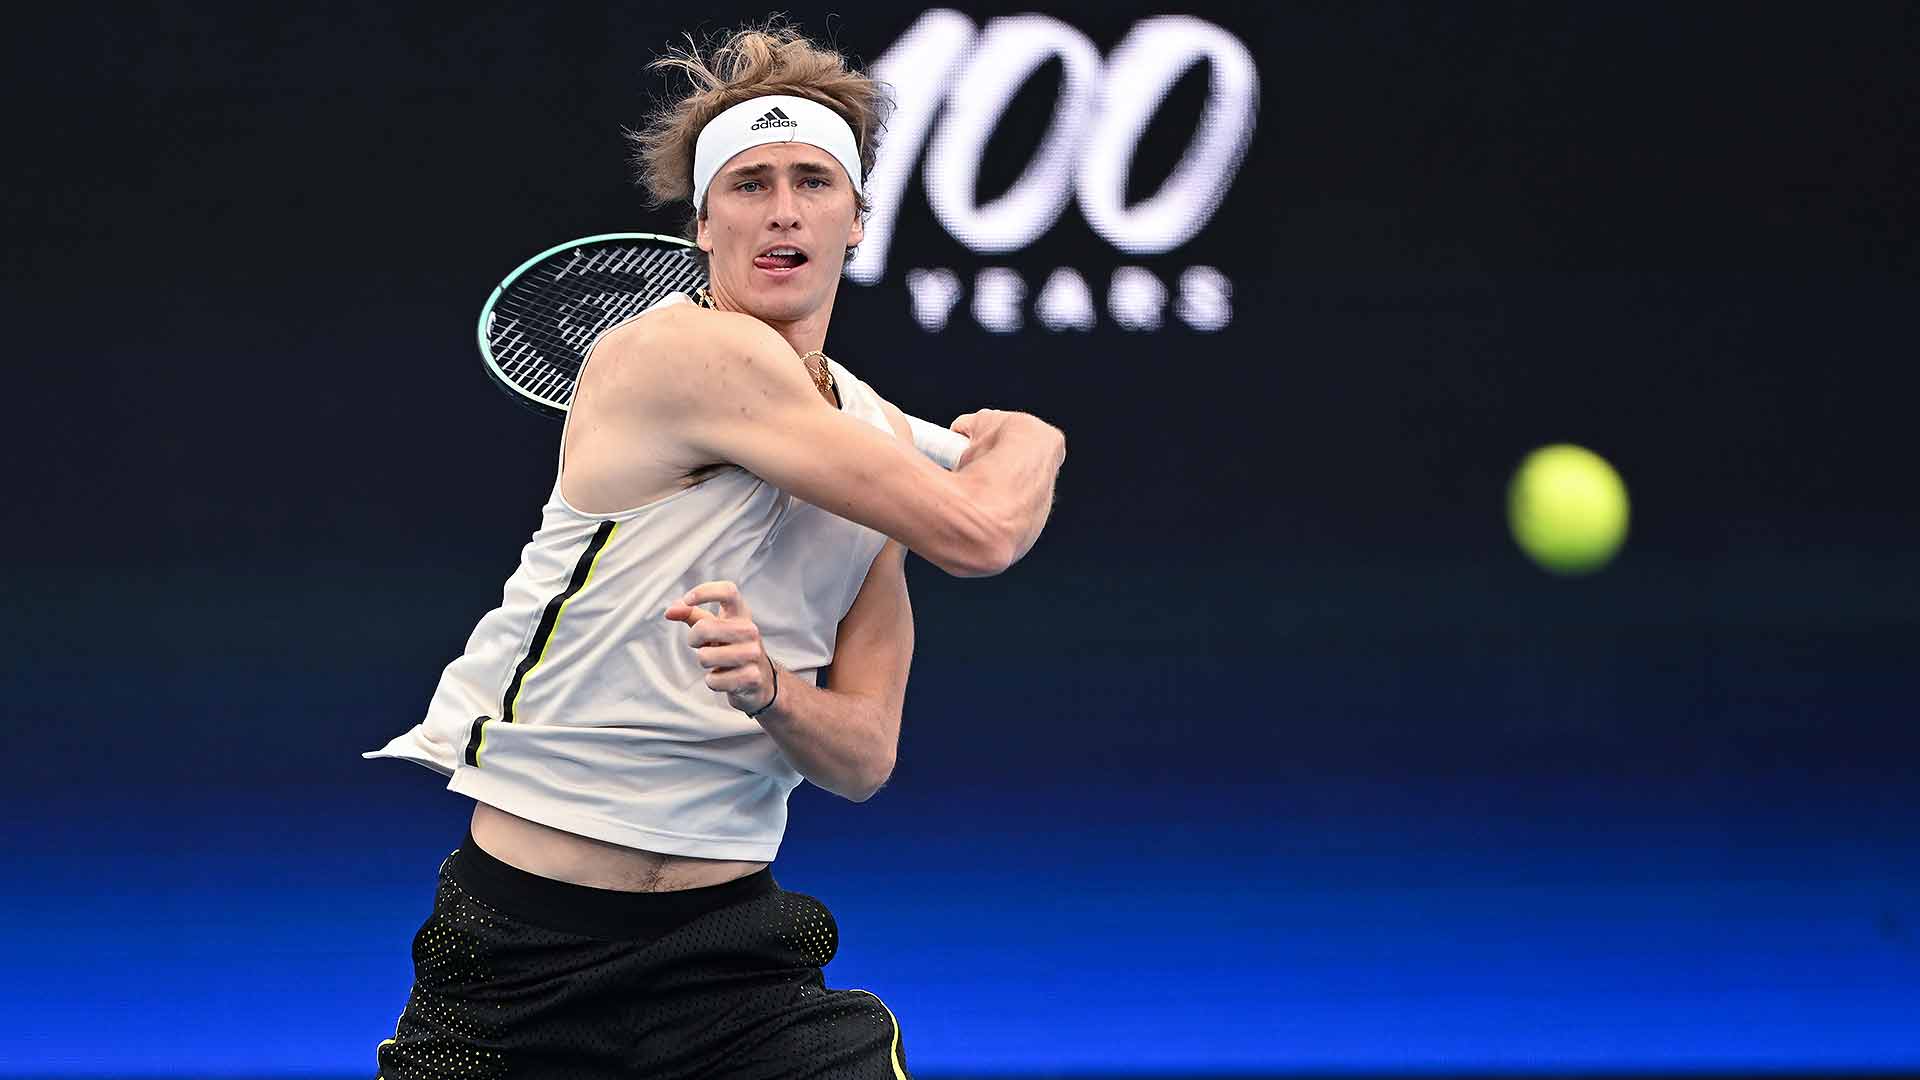 Alexander Zverev is set to make his return to the Tour in Sydney at the United Cup.